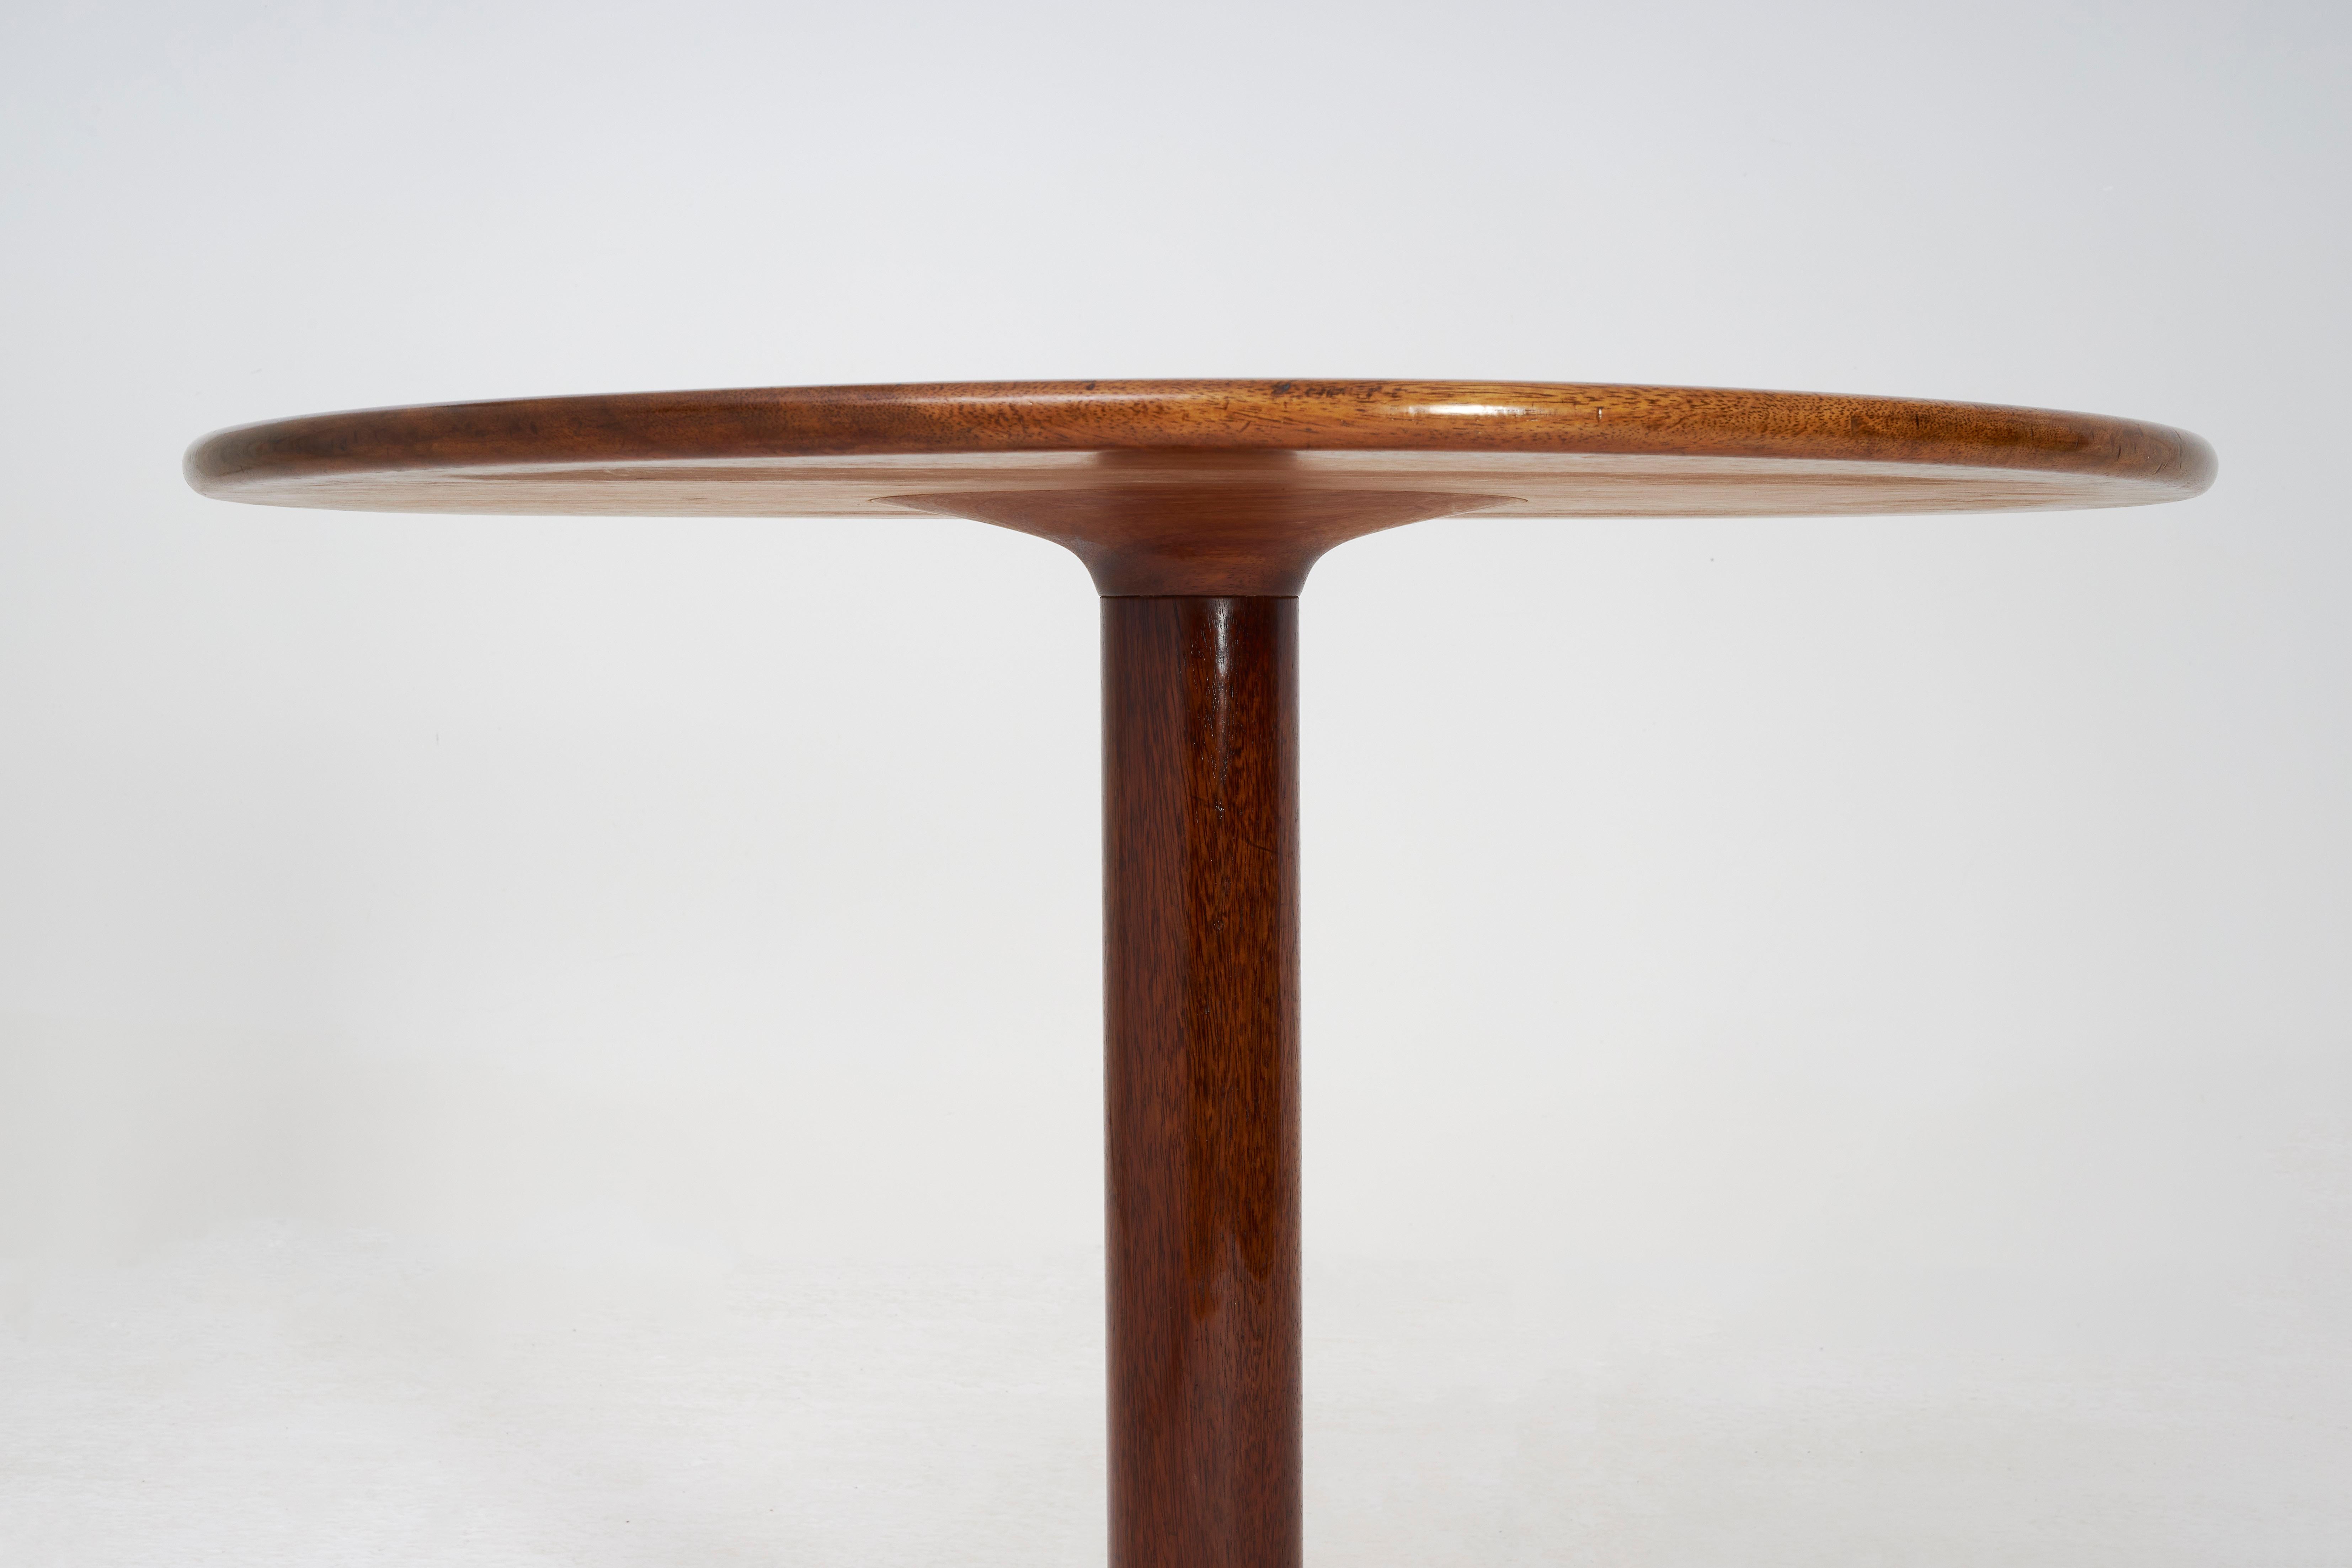 A elegantly crafted breakfast / sofa table attributed to John Makepeace.

John Makepeace is a renowned British furniture designer and craftsman known for his innovative and exquisite creations. With a career spanning over five decades, he has made